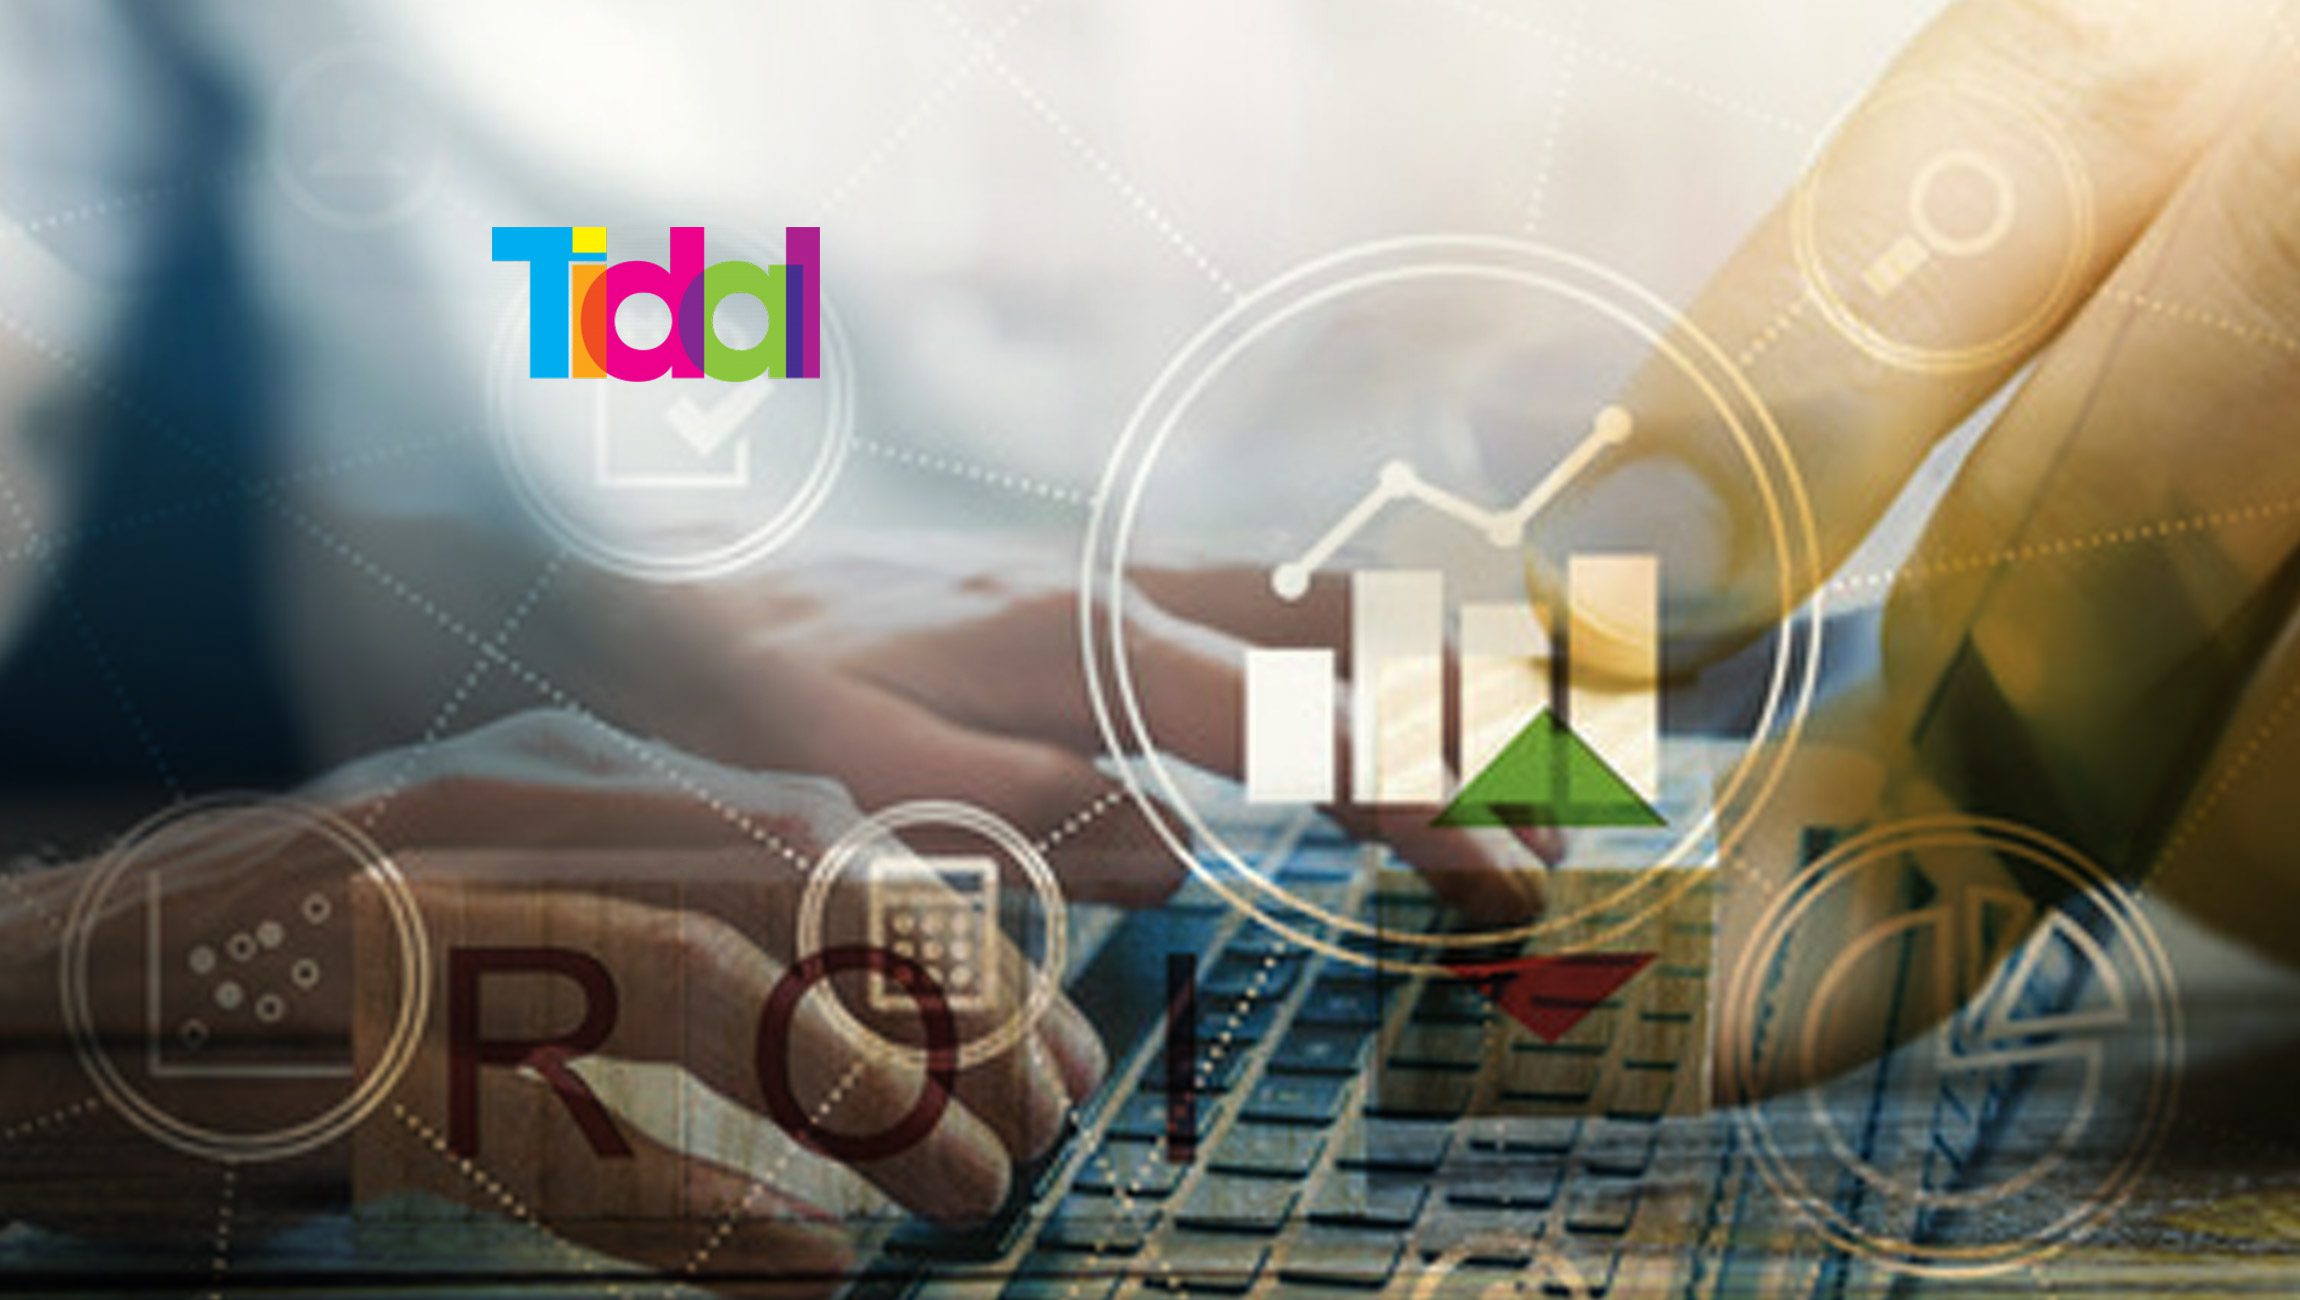 Tidal Announces Its Next ROI Webinar – Transforming the Contact Center Into a Loyalty Engine and a Source of Revenue